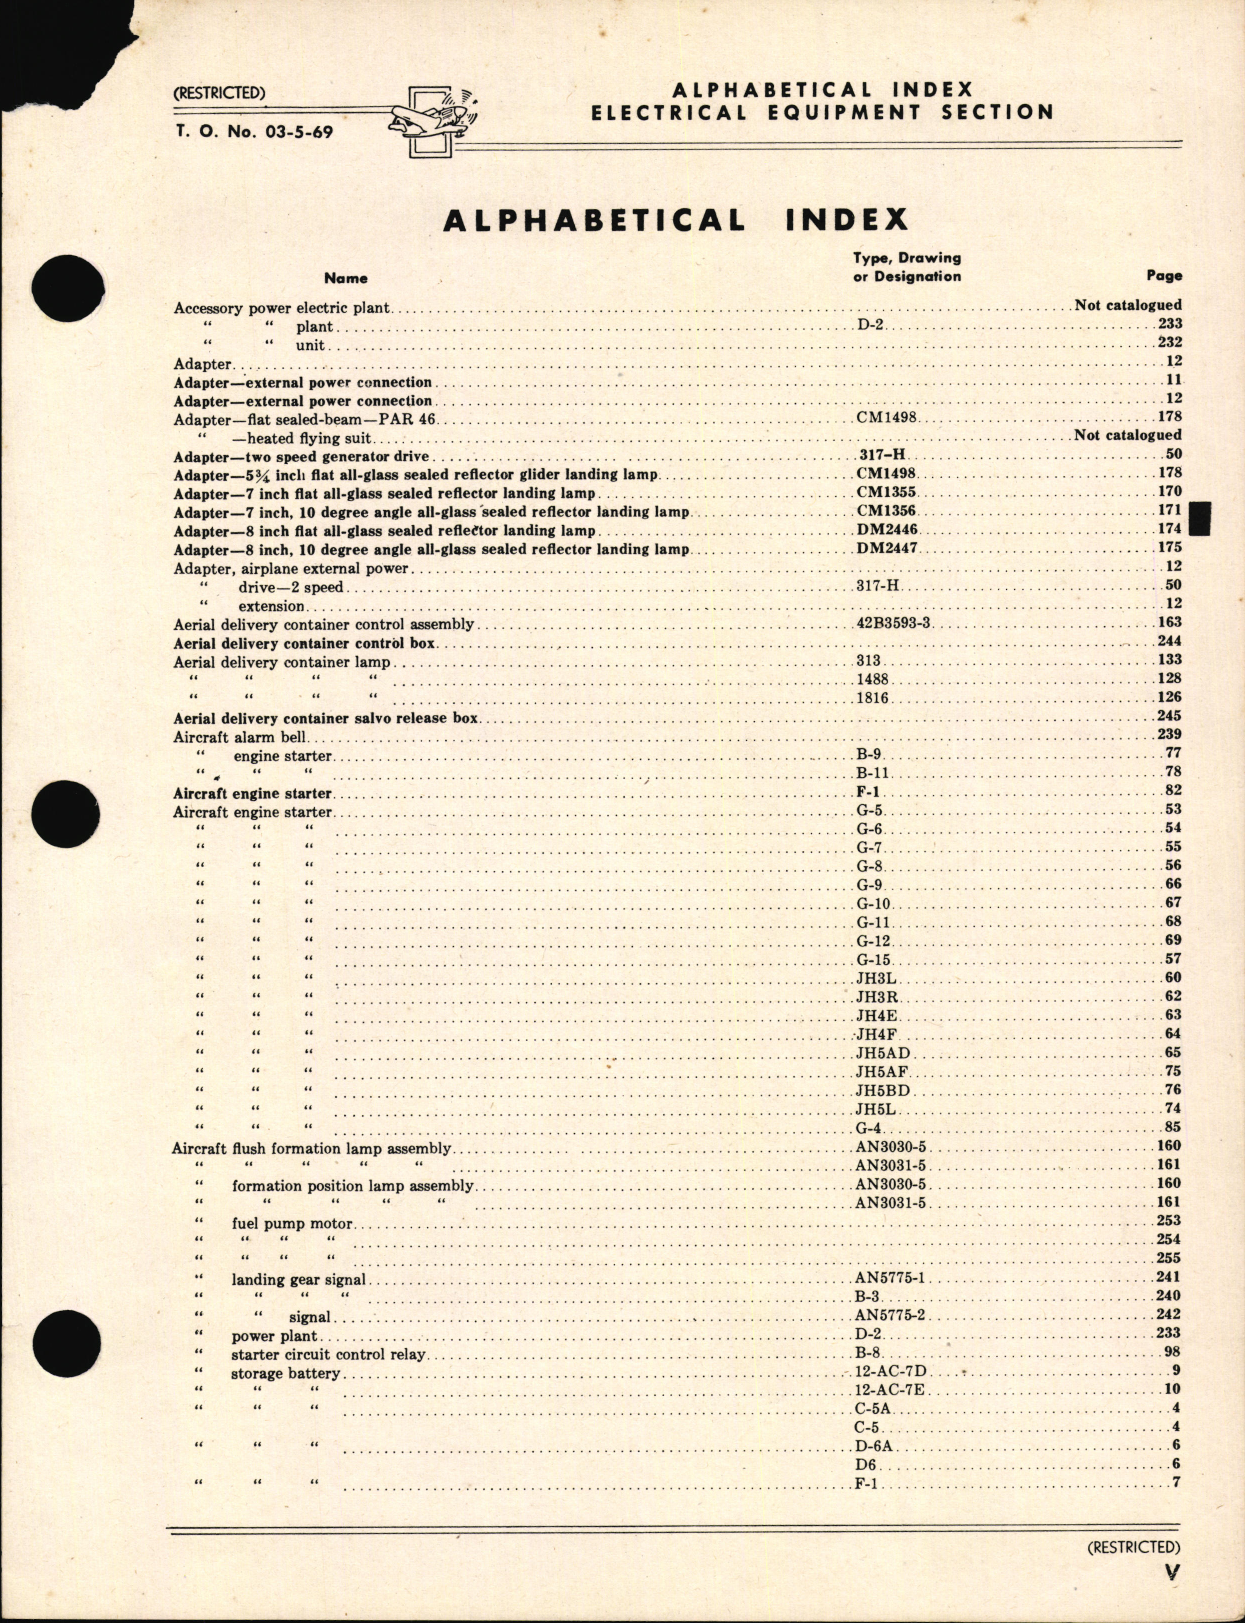 Sample page 5 from AirCorps Library document: Index of Army-Navy Aeronautical Equipment - Electrical